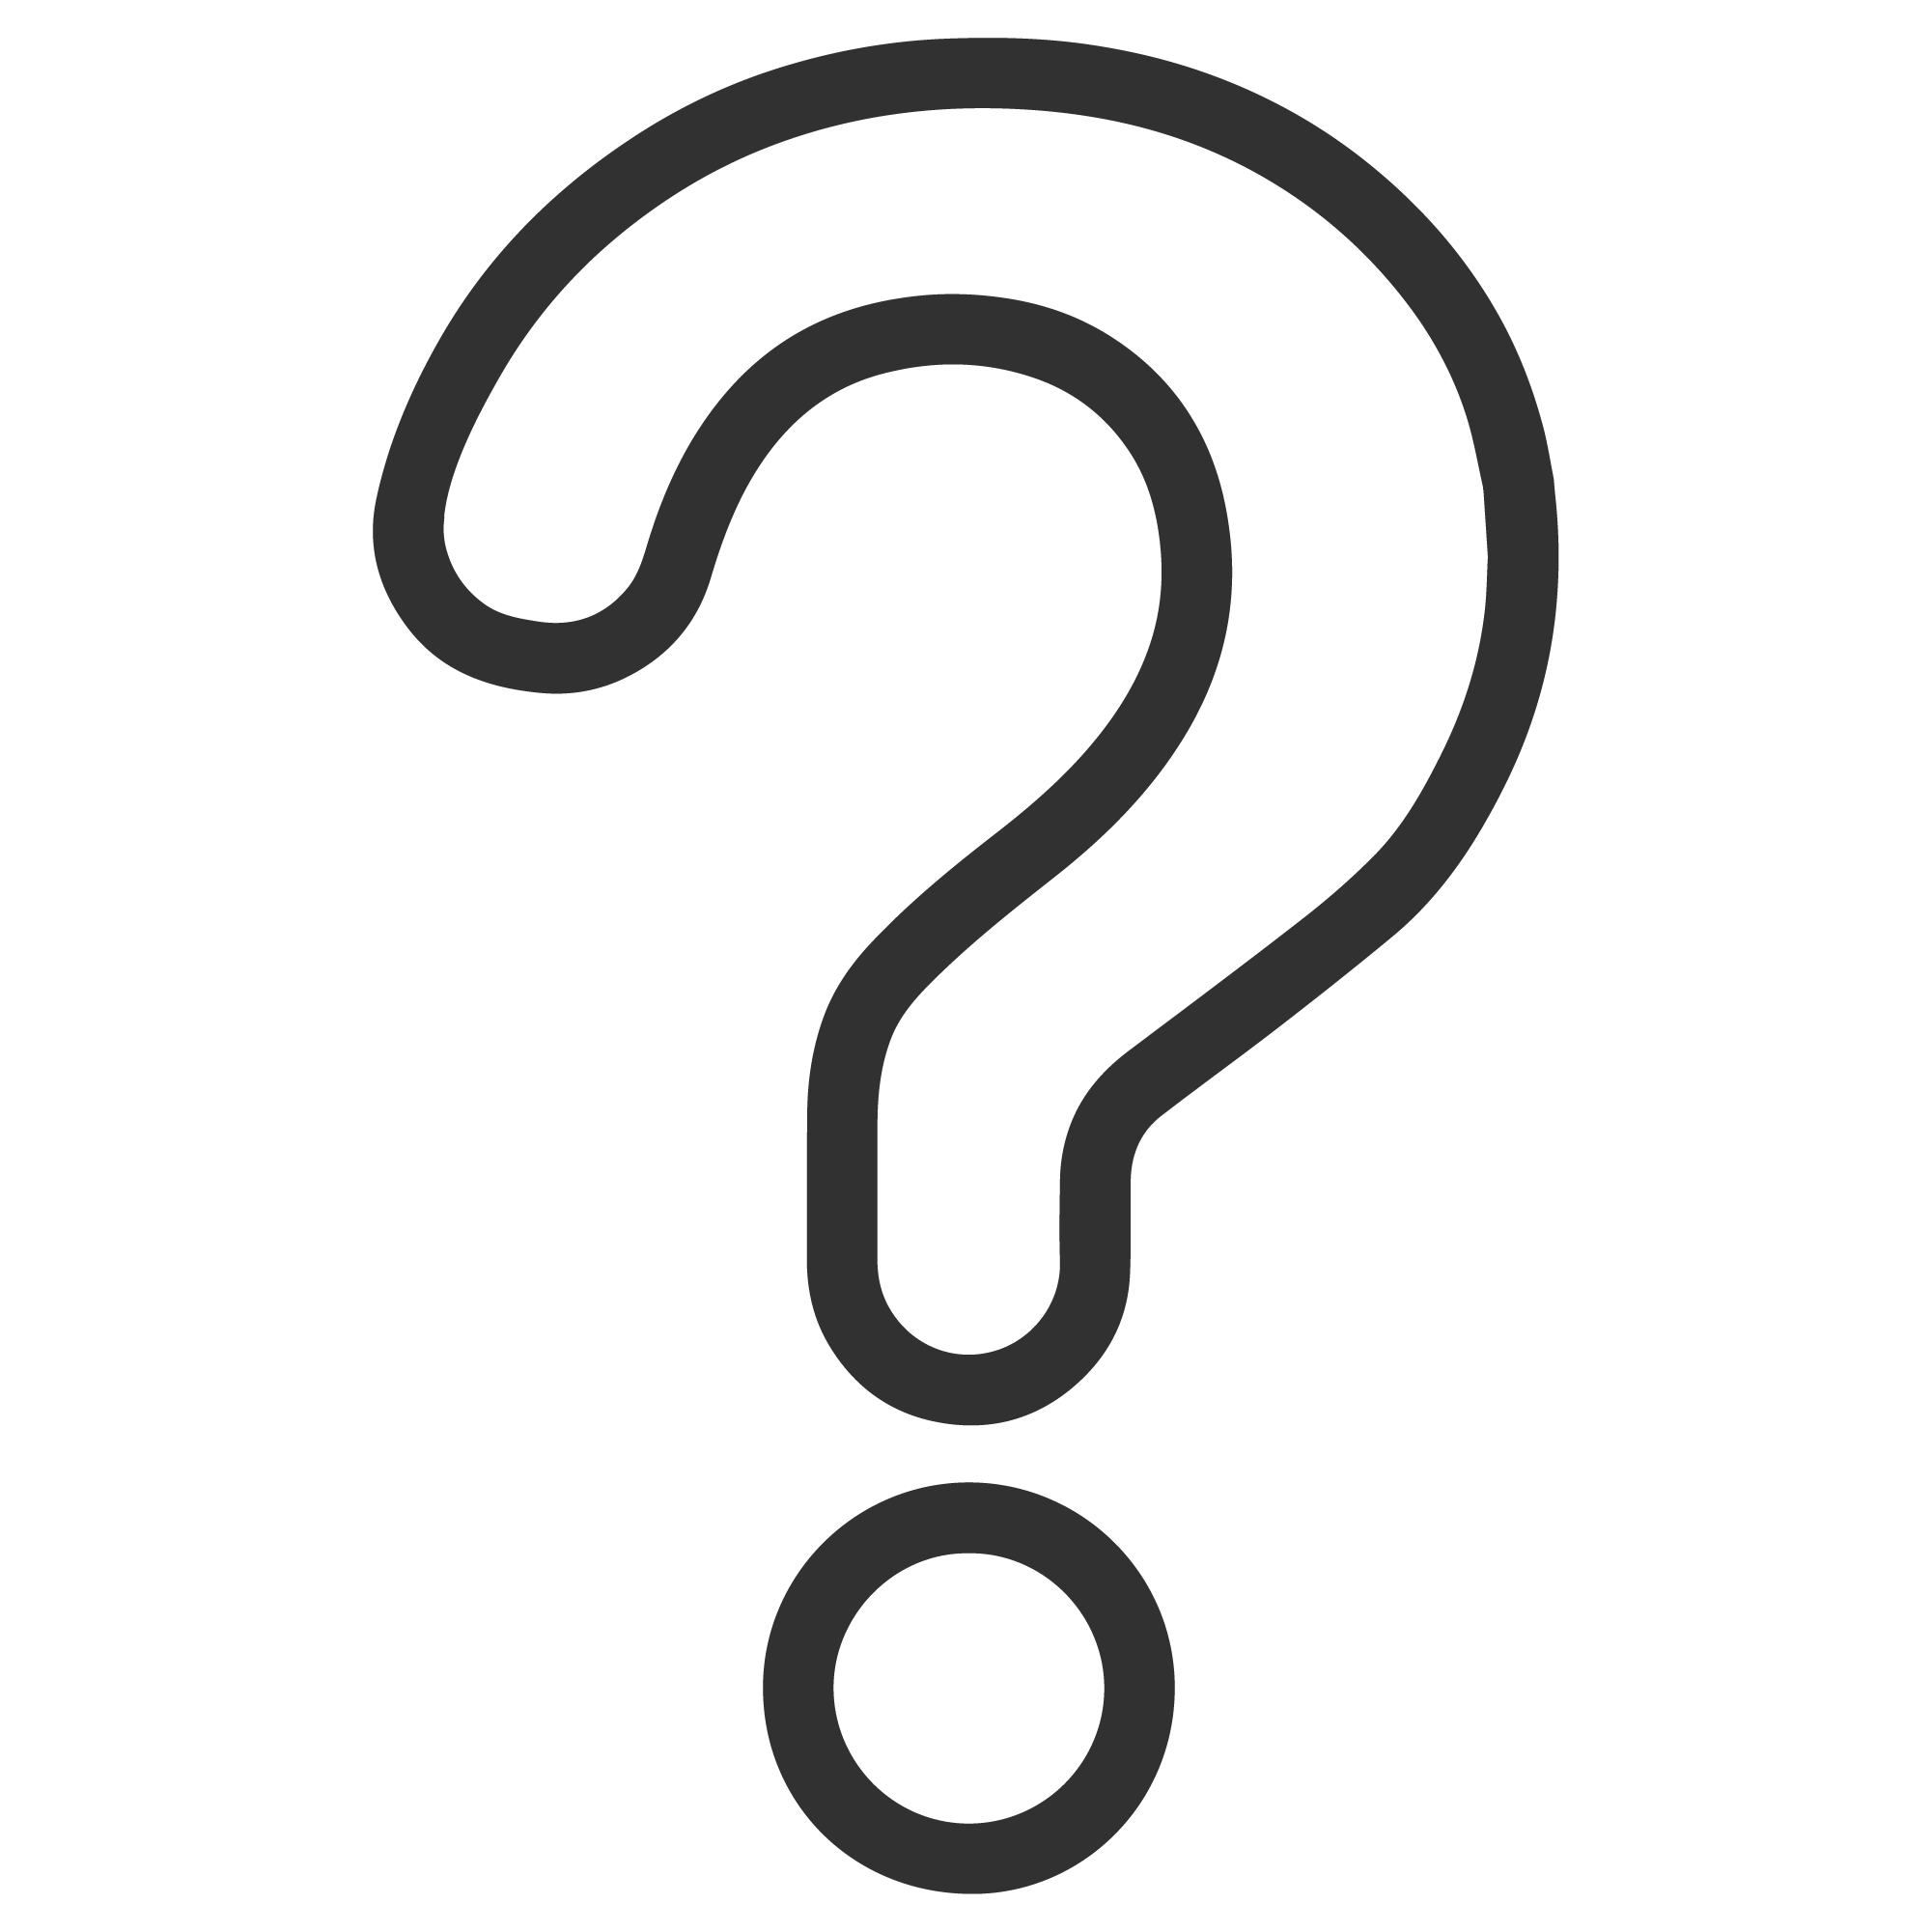 image of question mark icon